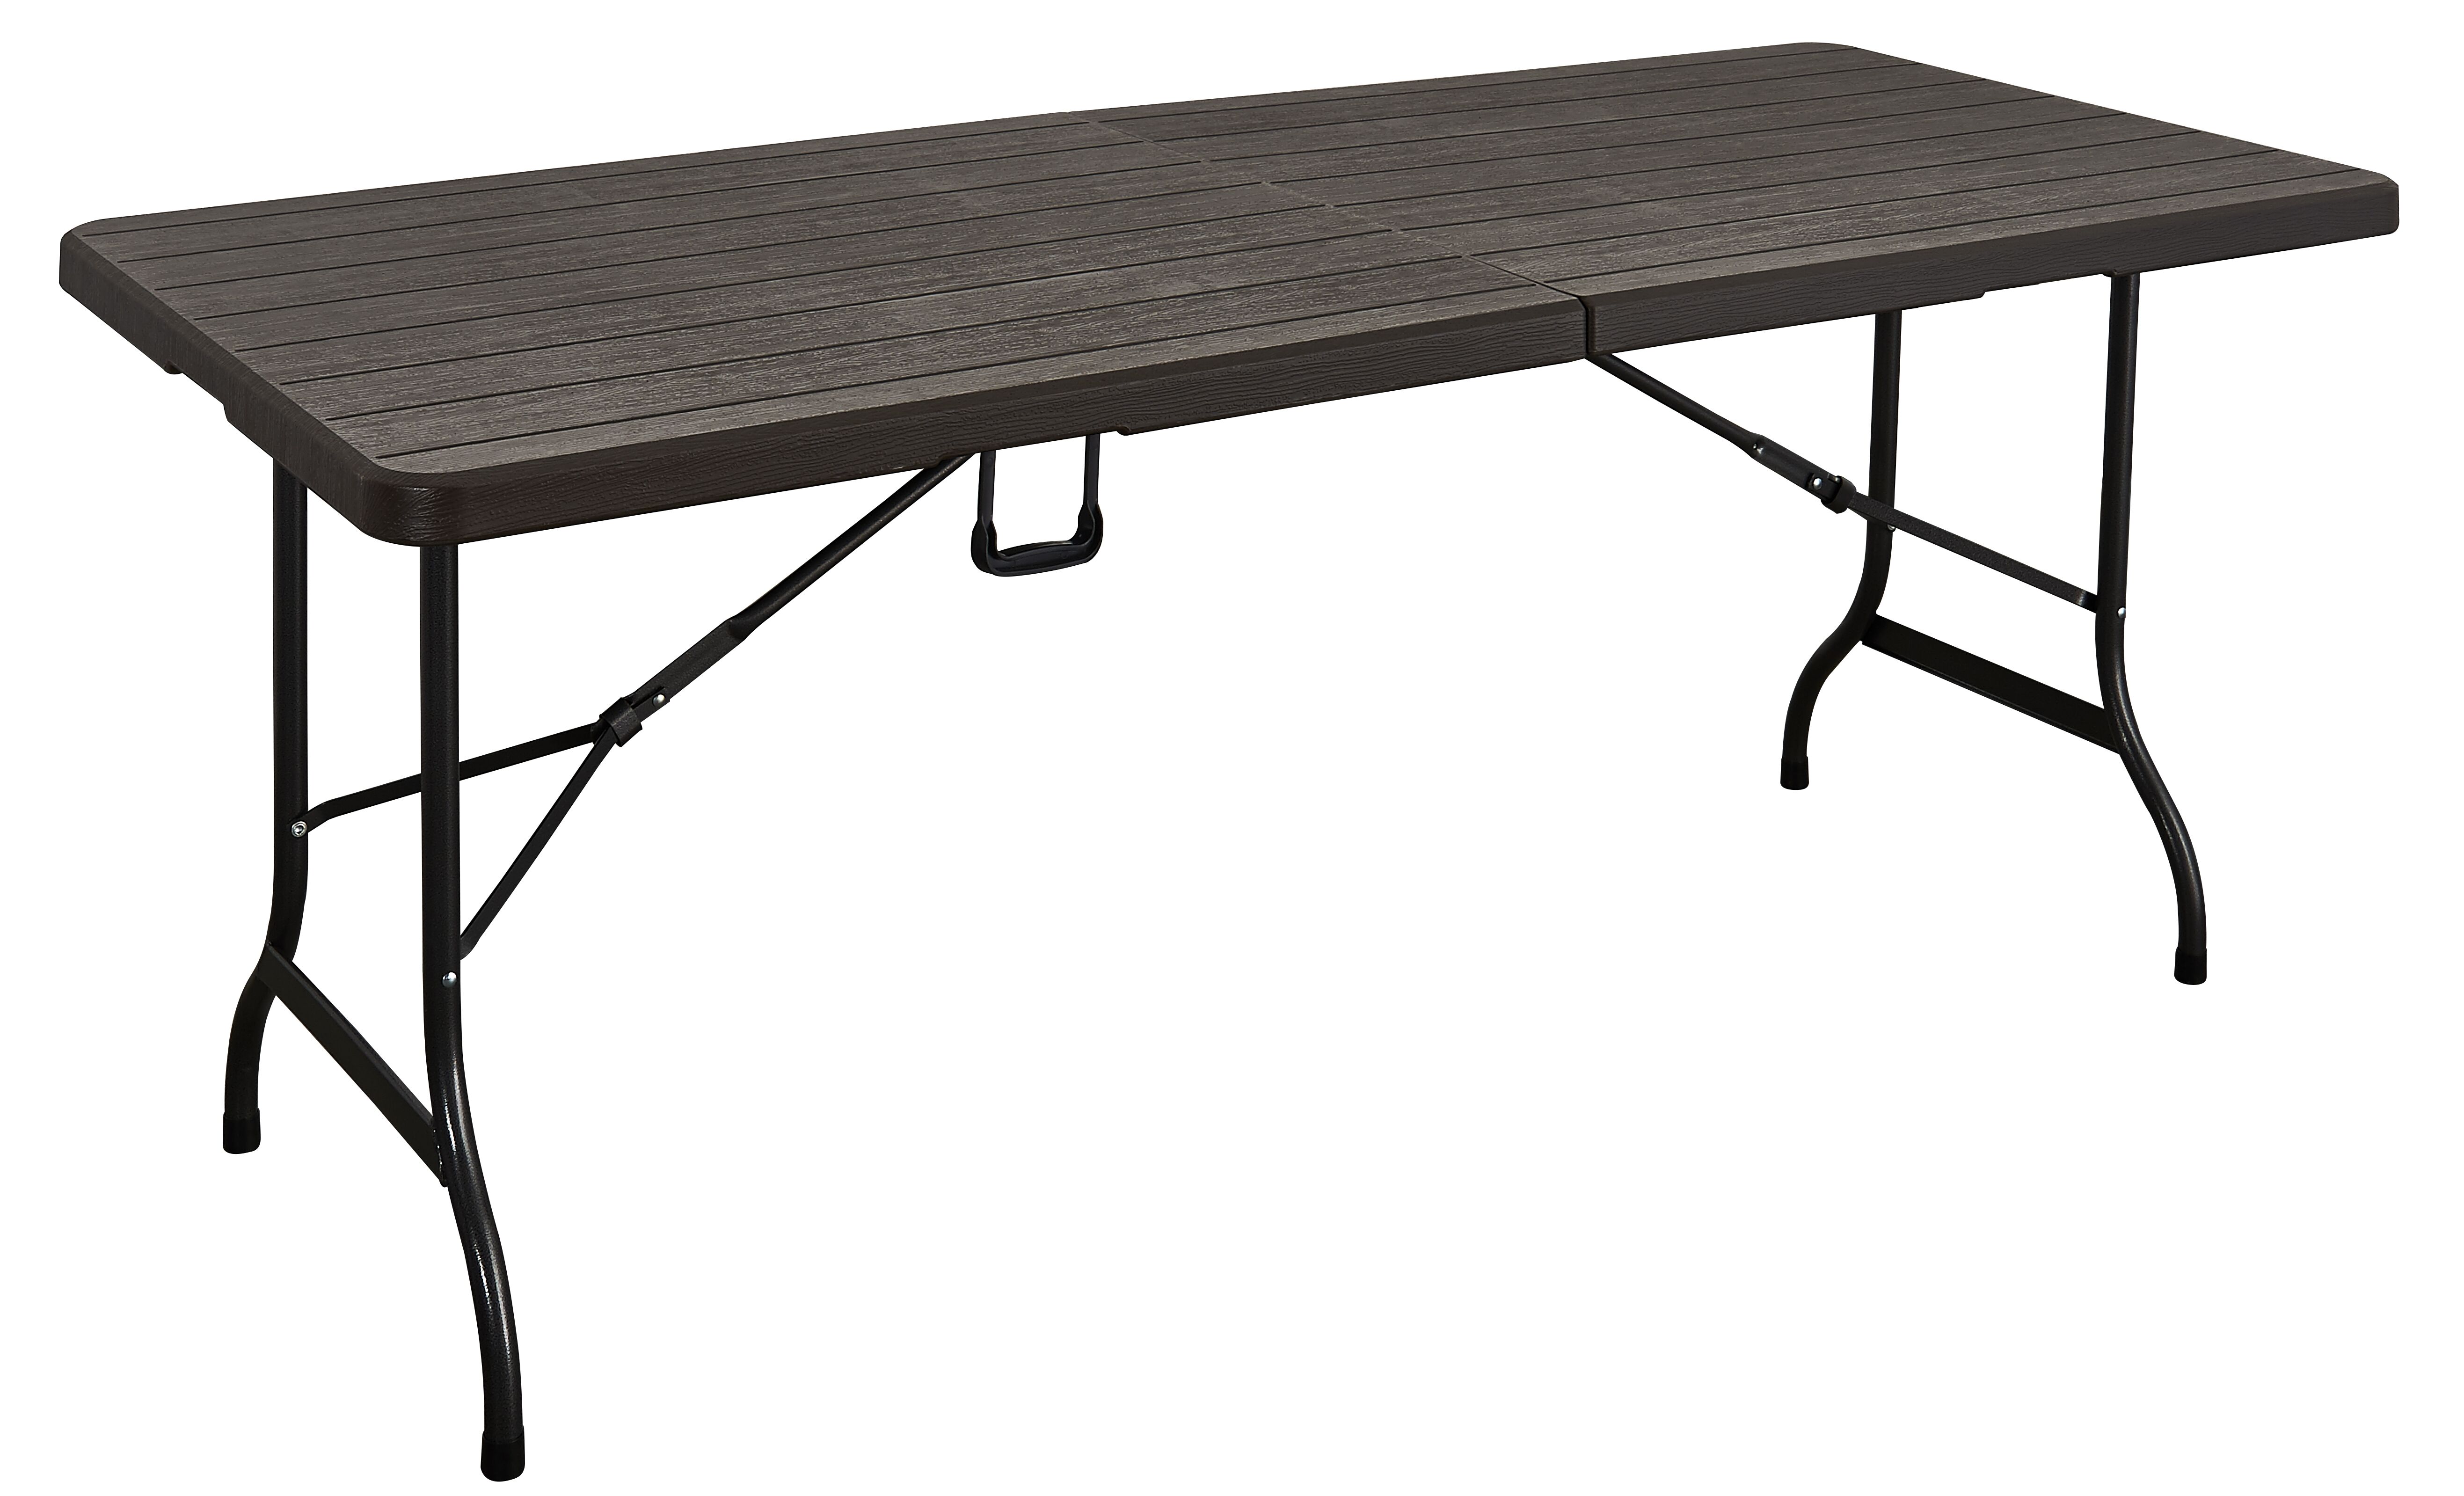 6' FOLDING TABLE WITH WOOD DESIGN WZK-180